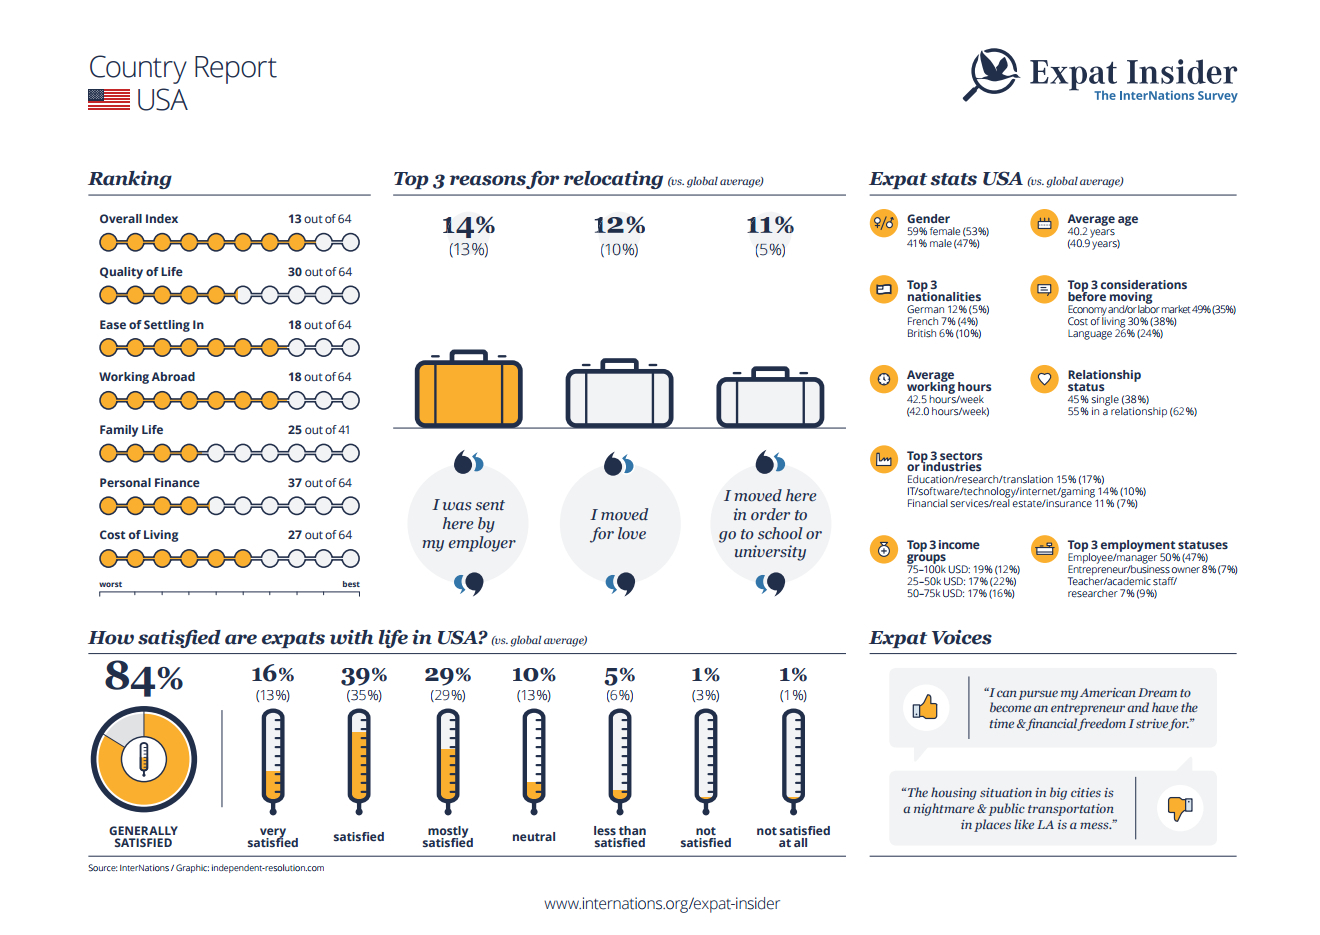 Expat statistics for the USA - infographic